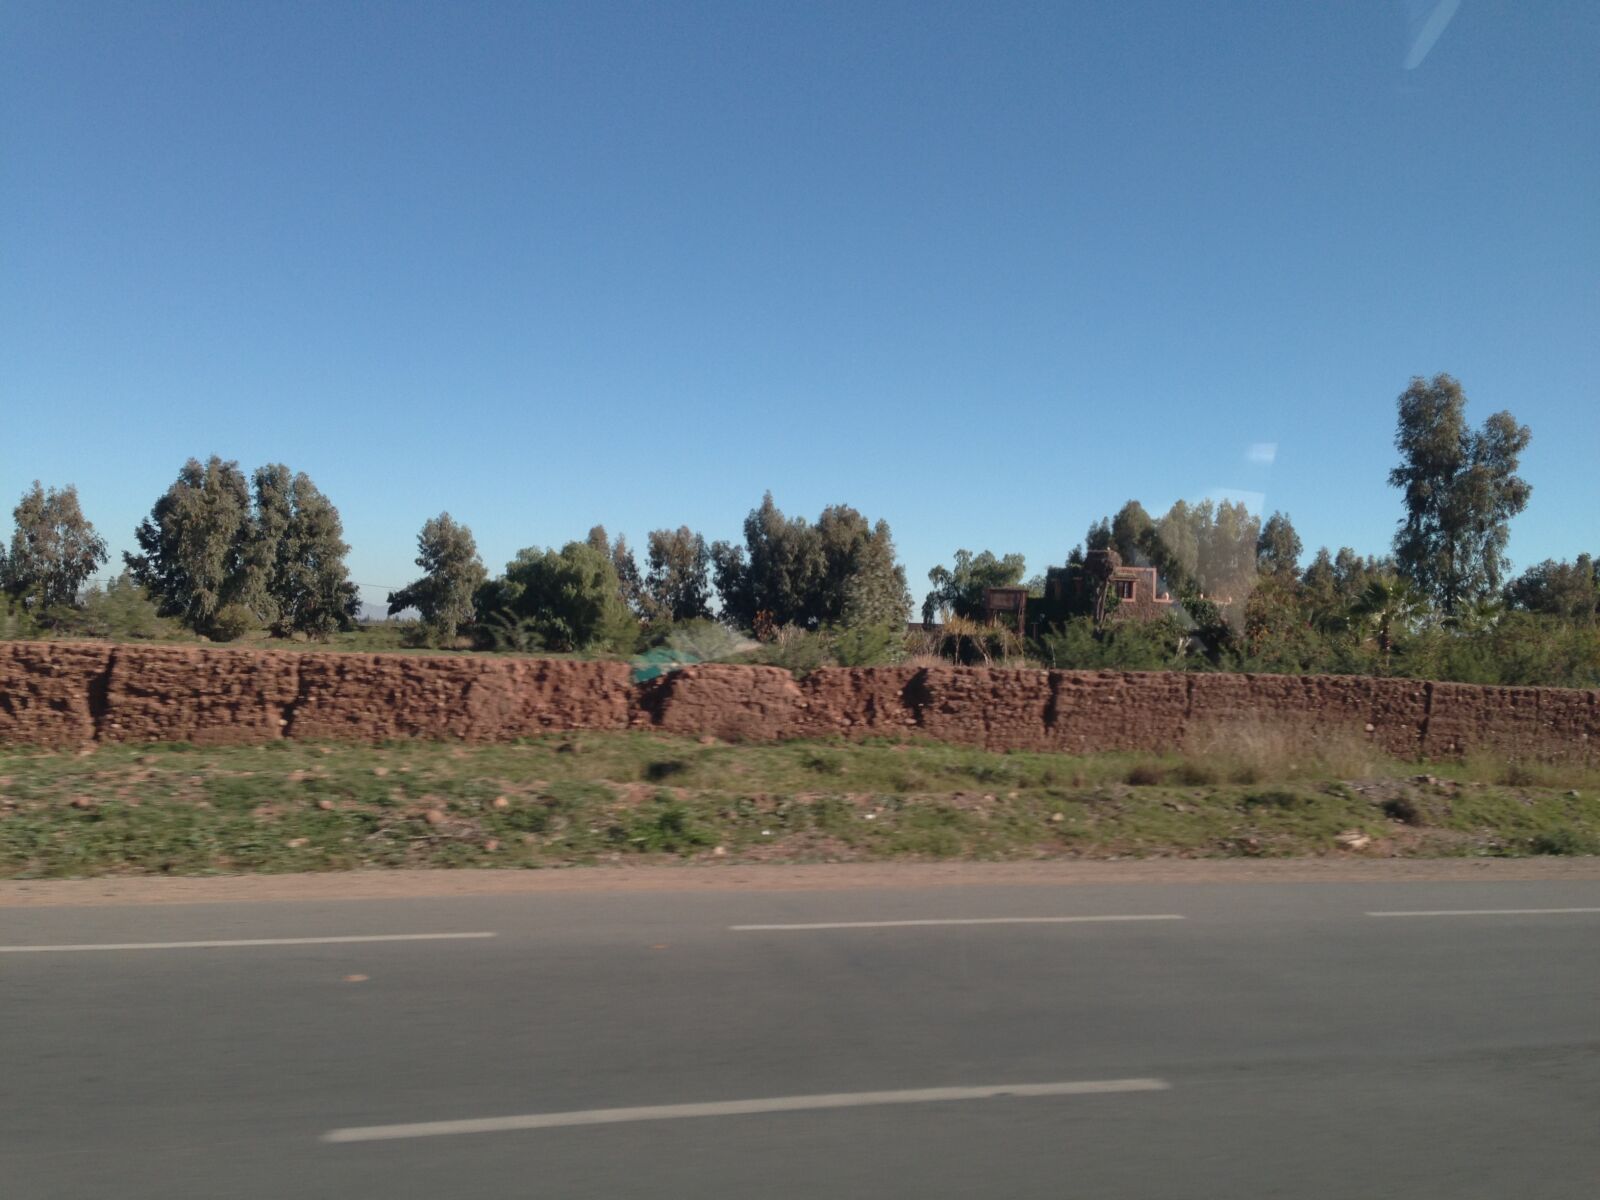 Apple iPhone 5 sample photo. Country, road, marrakech photography